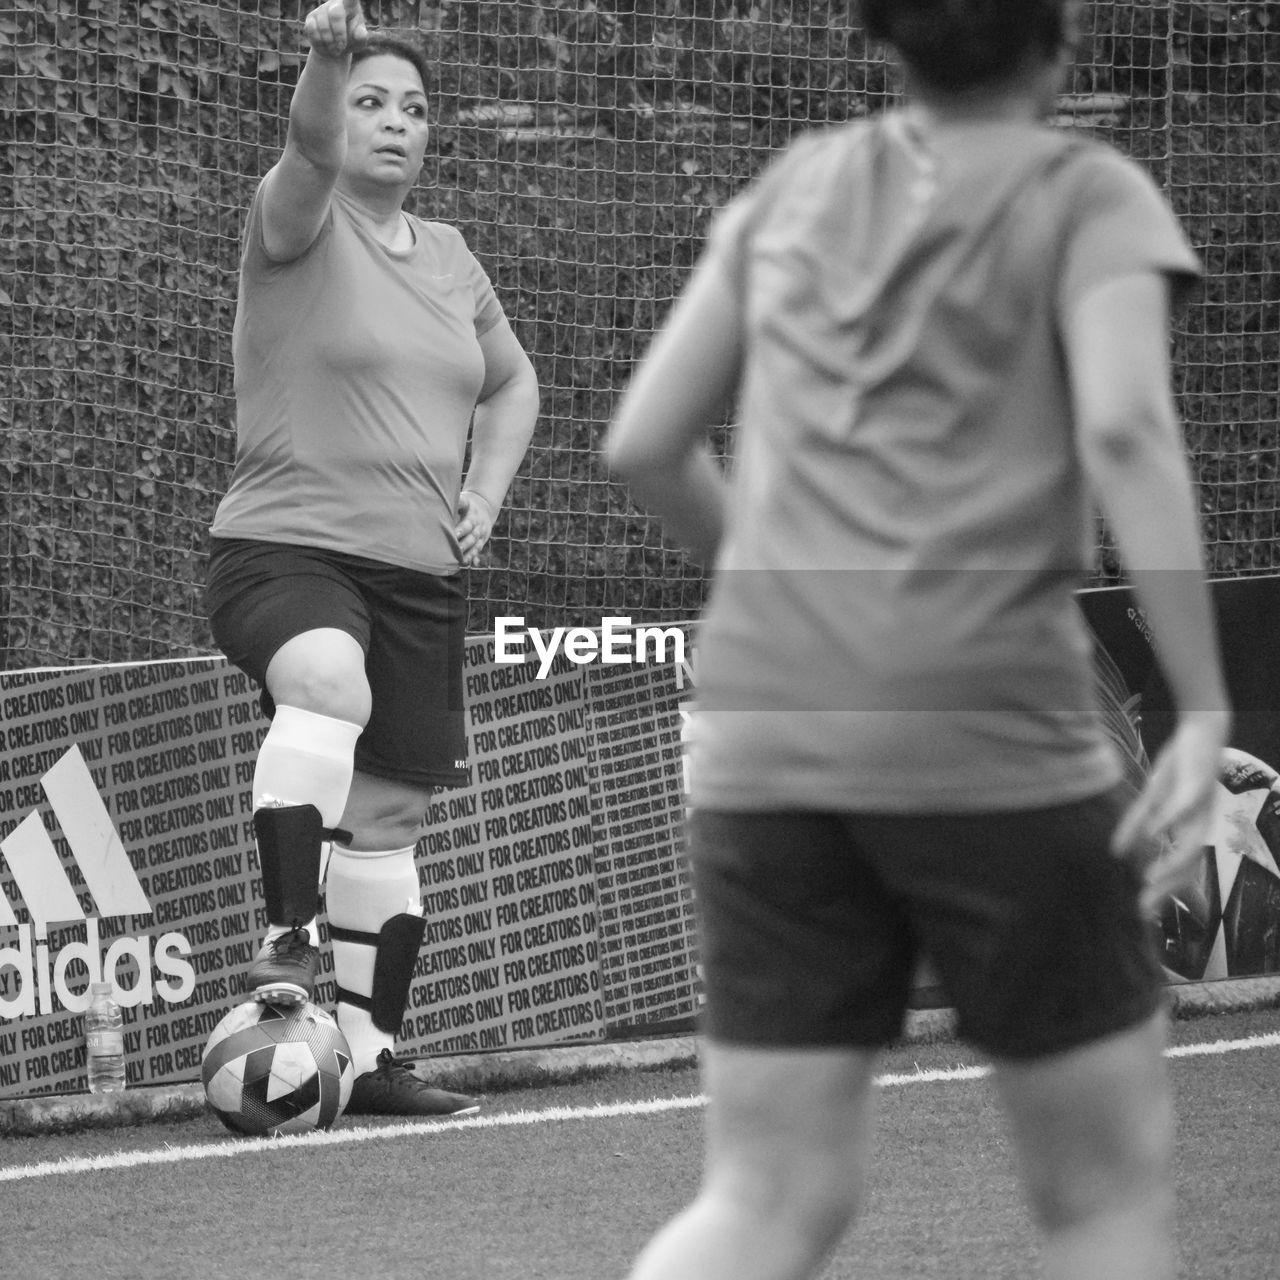 sports, black and white, two people, athlete, monochrome, motion, men, sports clothing, adult, monochrome photography, black, competition, lifestyles, white, young adult, player, exercising, clothing, ball, togetherness, leisure activity, day, running, sports equipment, full length, women, activity, competitive sport, friendship, person, architecture